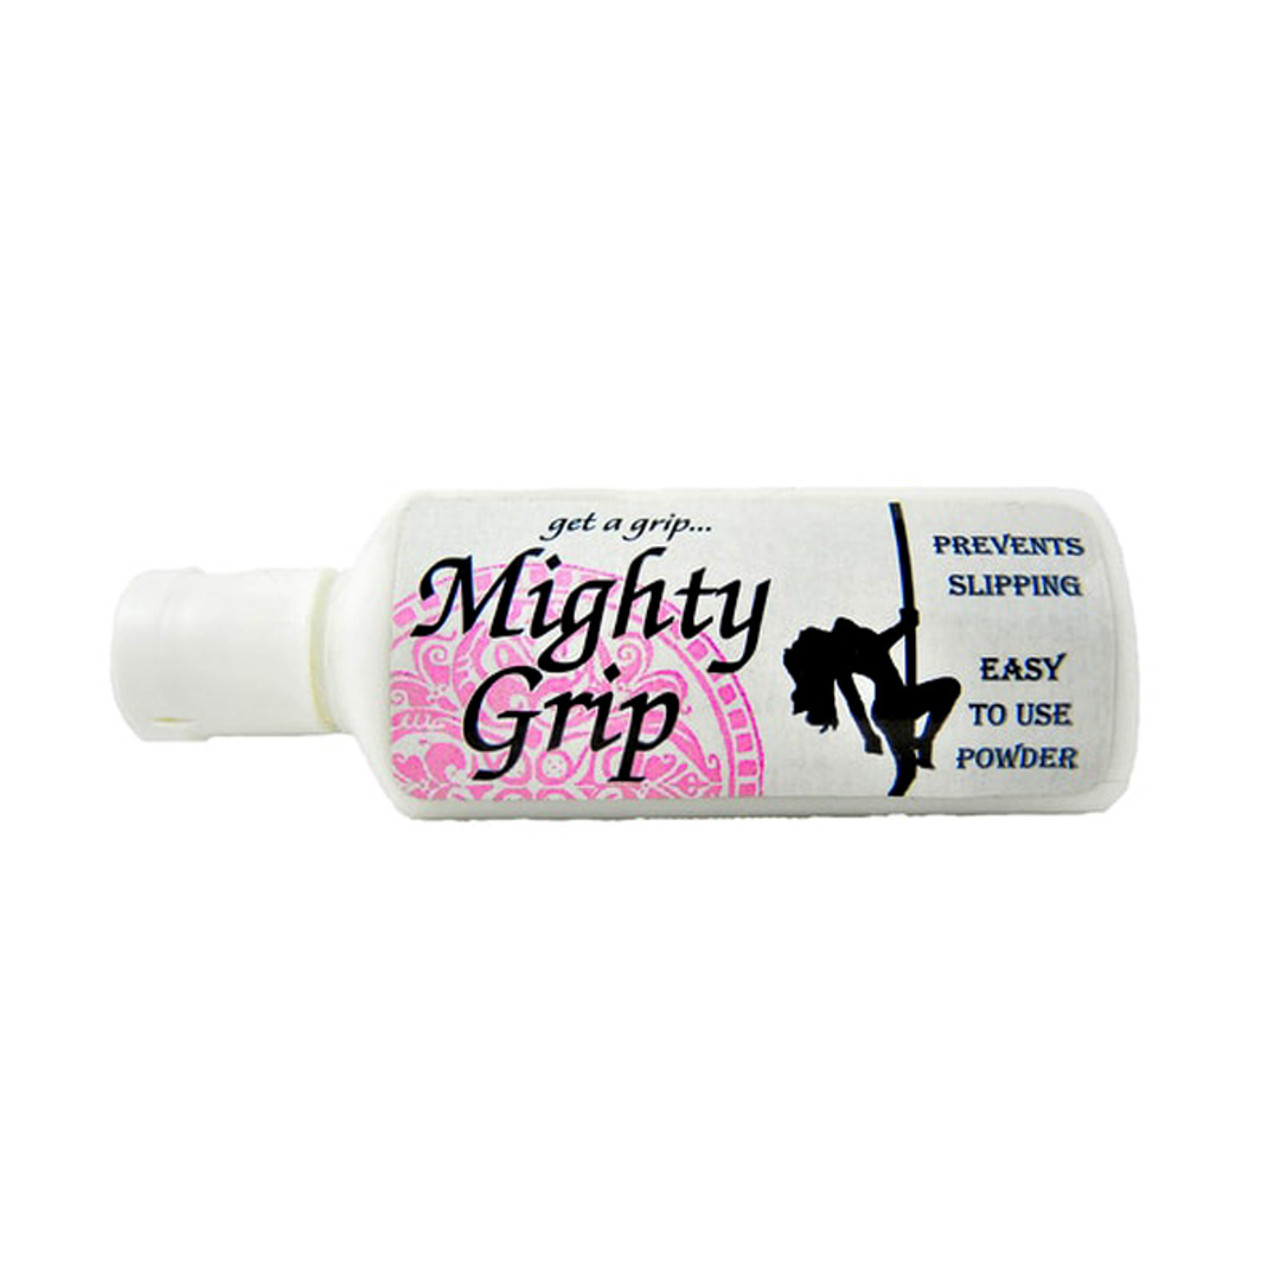 https://cdn11.bigcommerce.com/s-rph88/images/stencil/1280x1280/products/1670/172893/mighty-grip-powder_2a__62574.1553571370.jpg?c=2